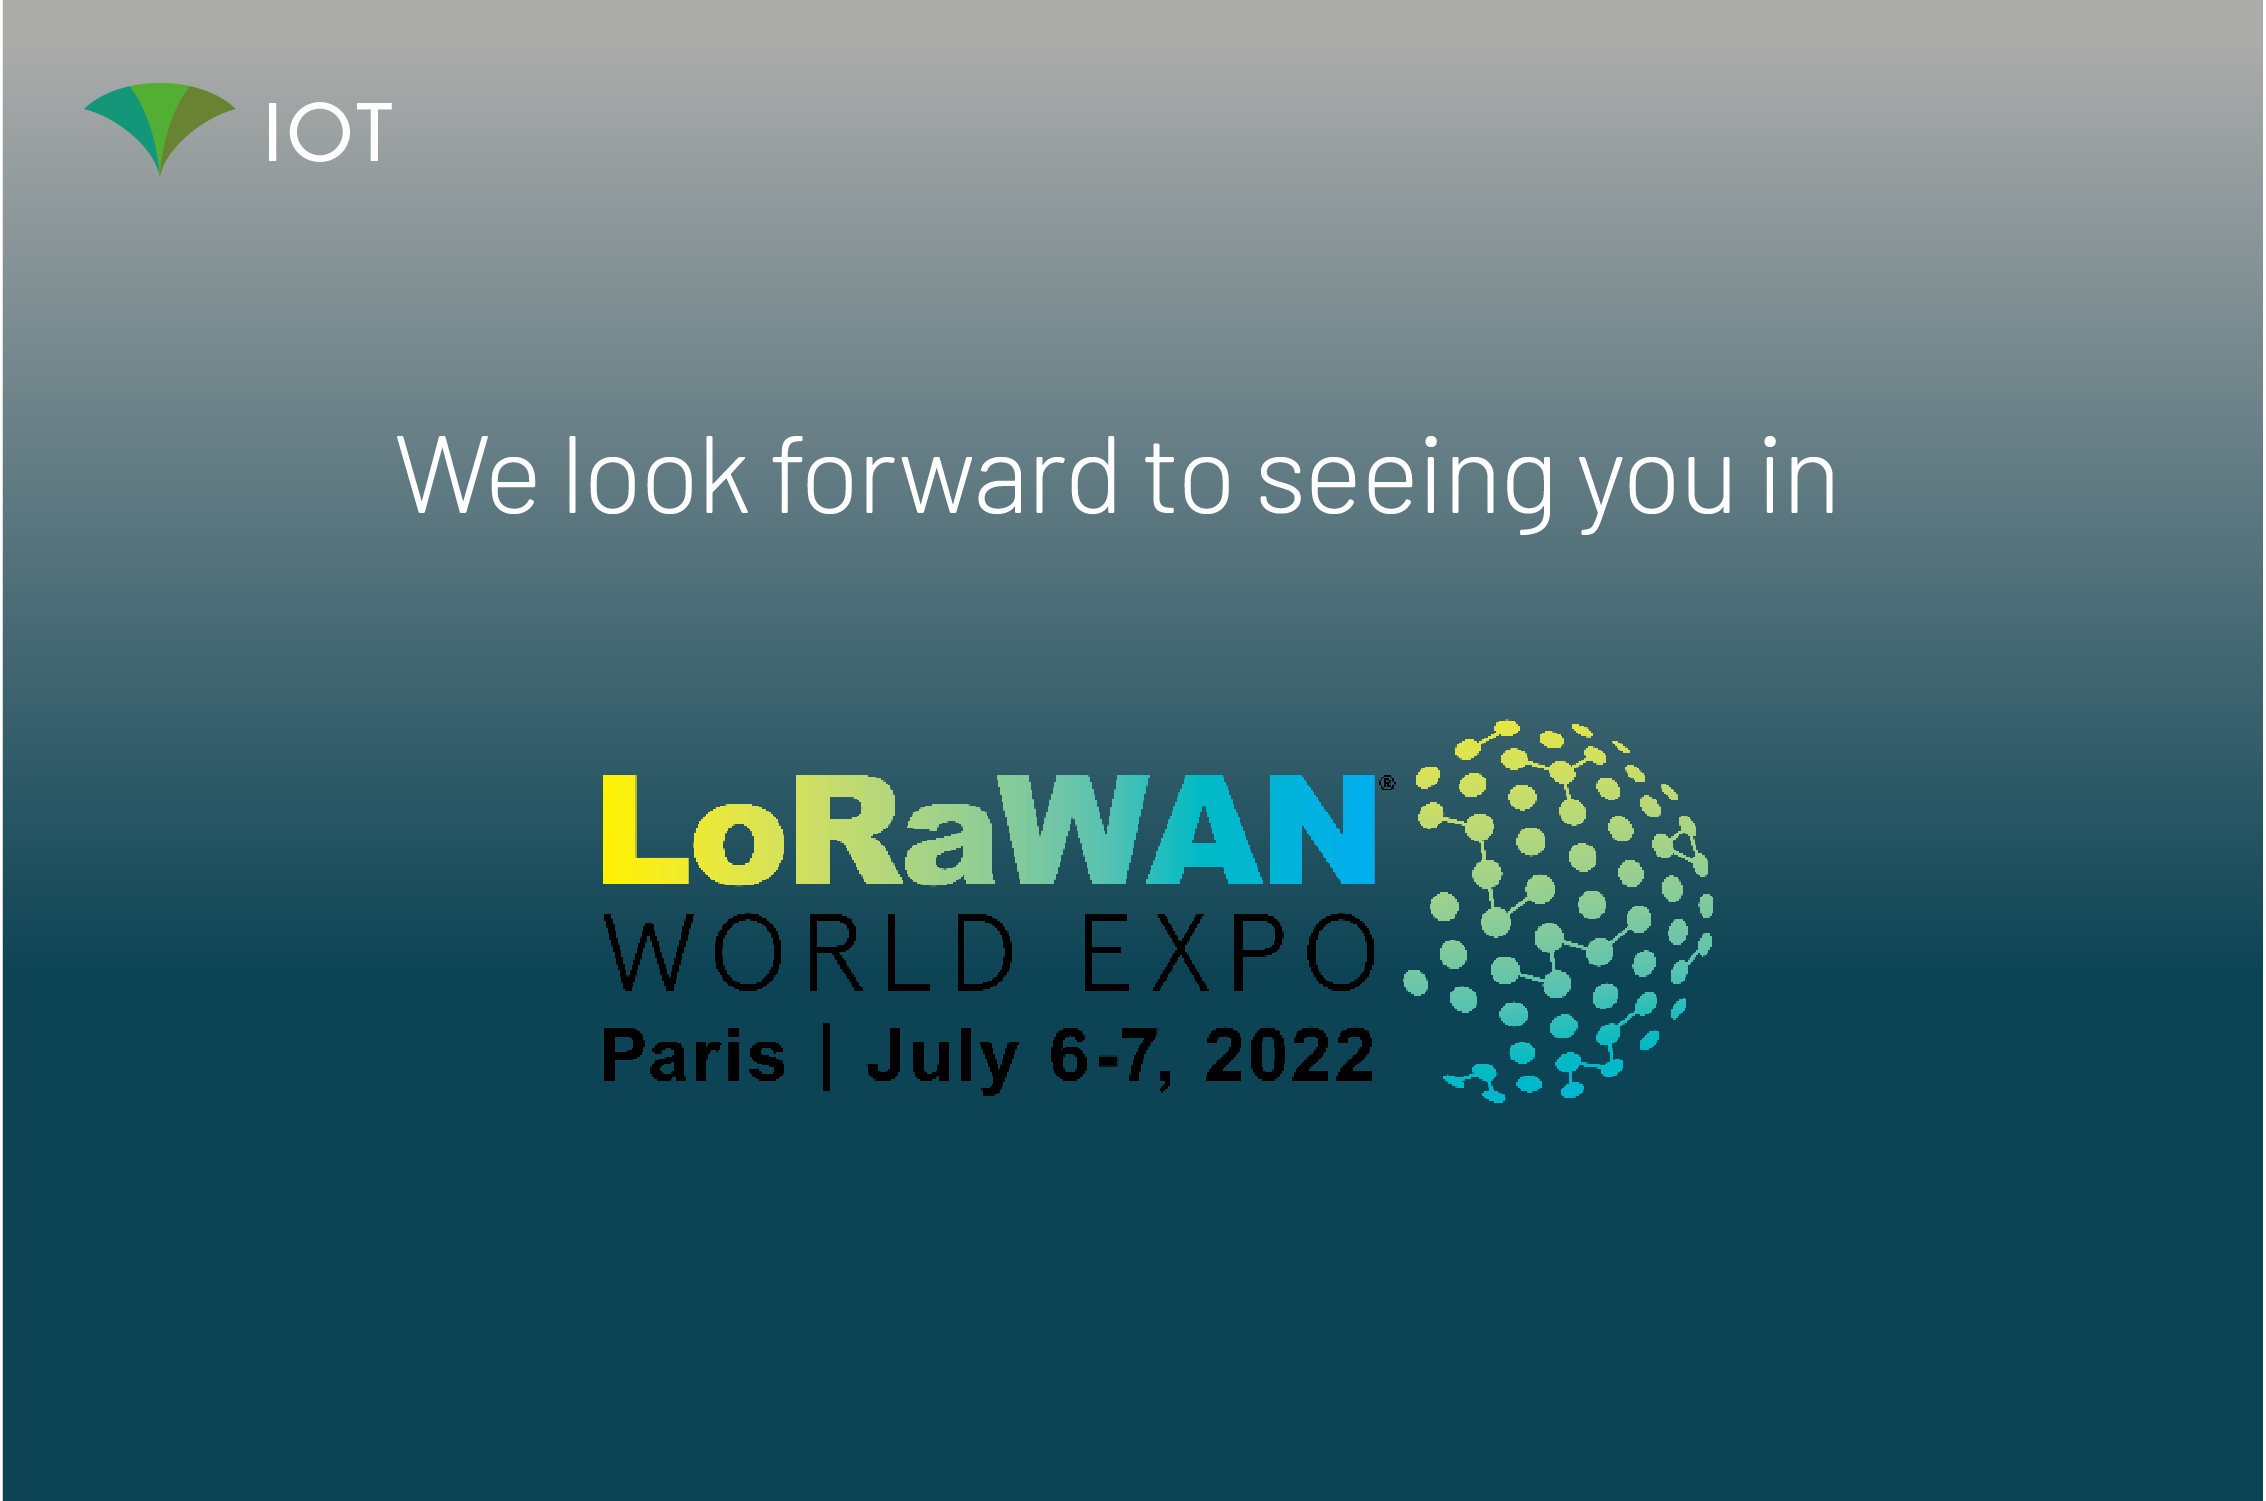 LoRaWAN World Expo in Paris. There we are.